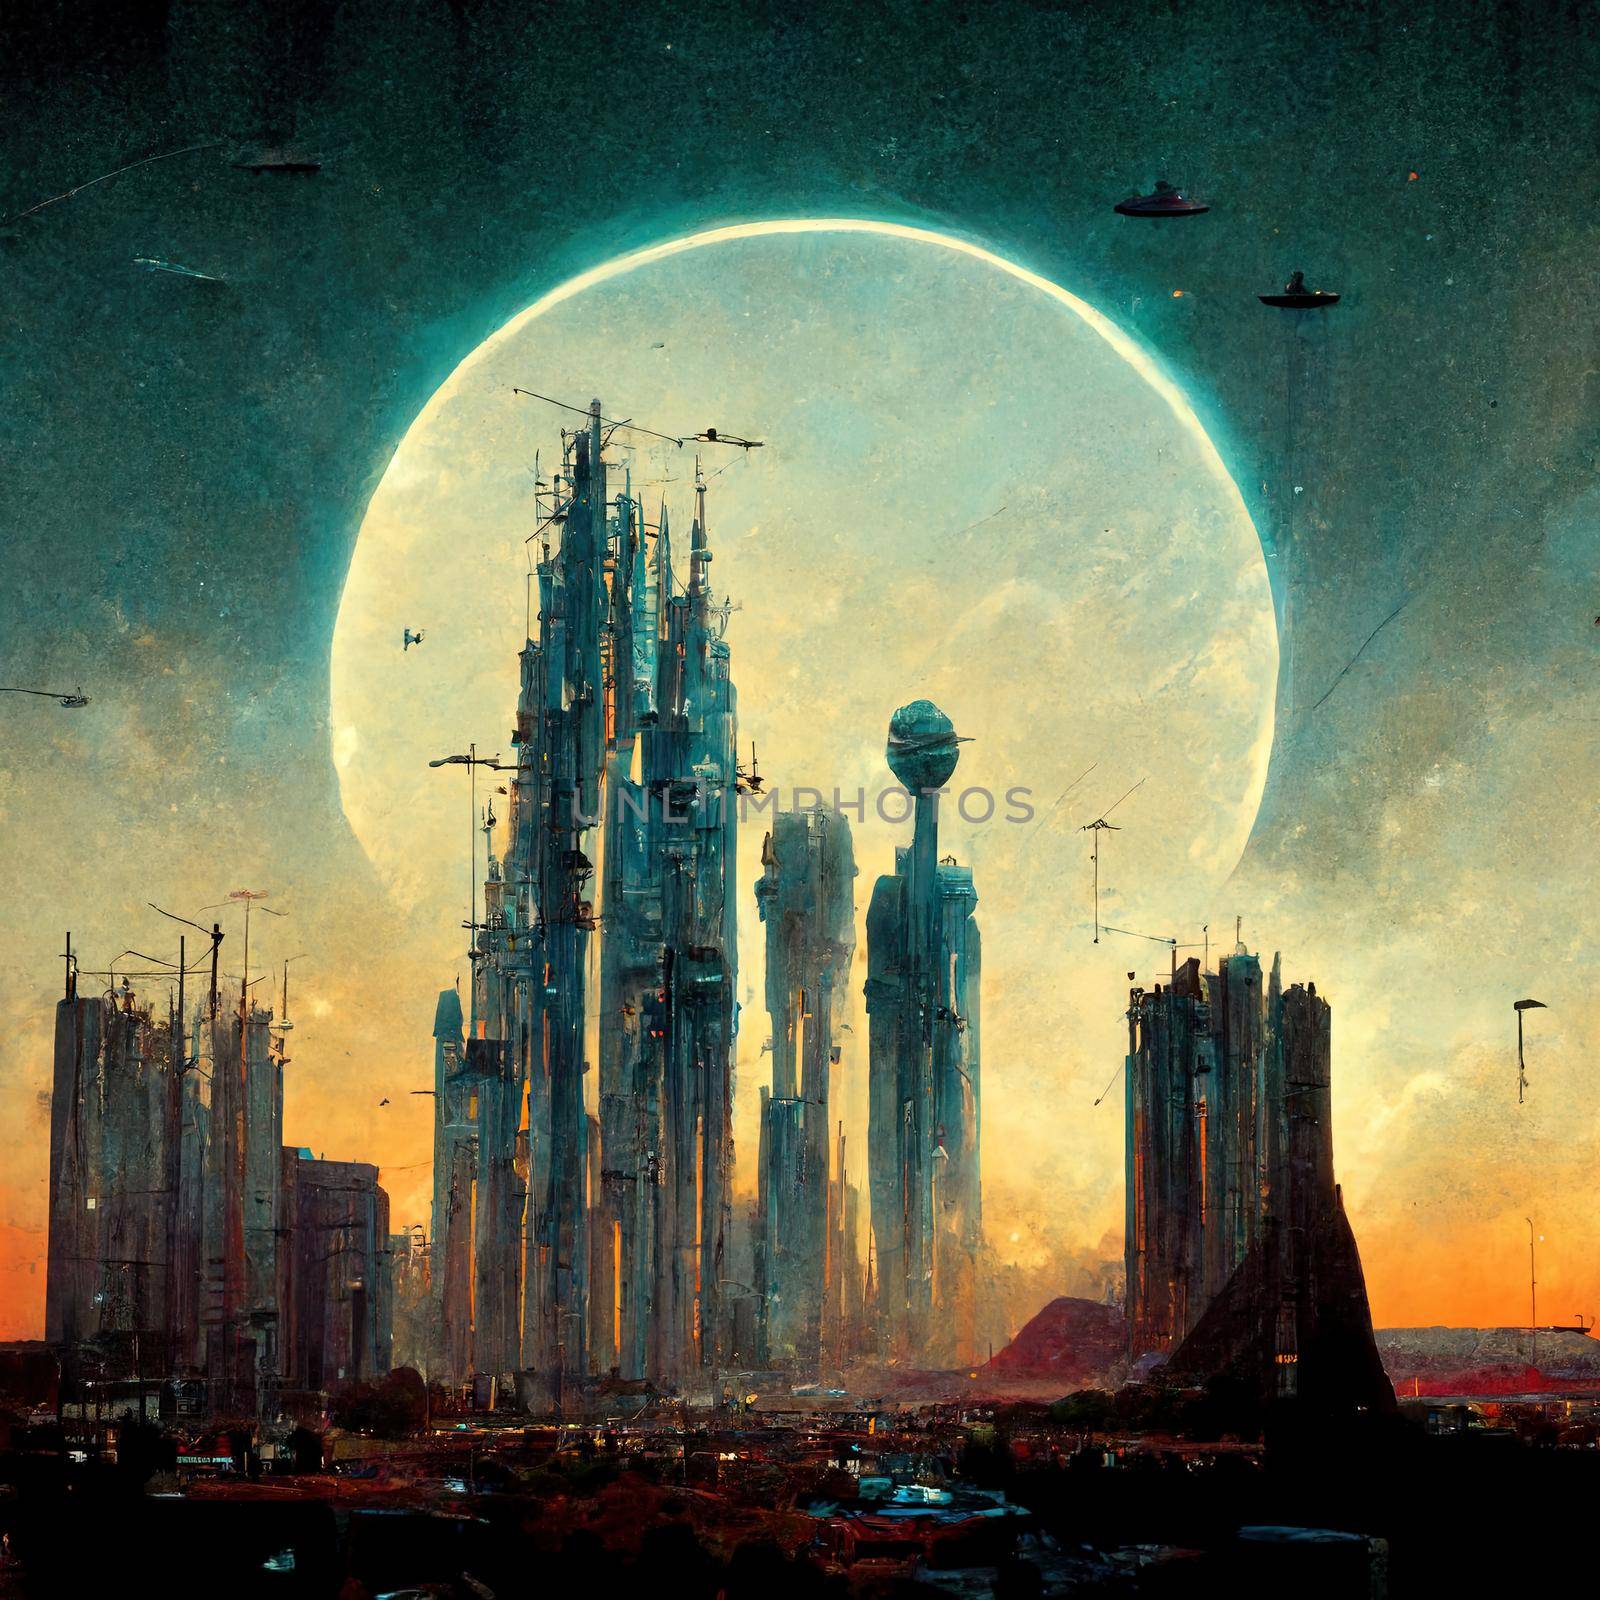 a portrait of a alien City from another world by 2ragon